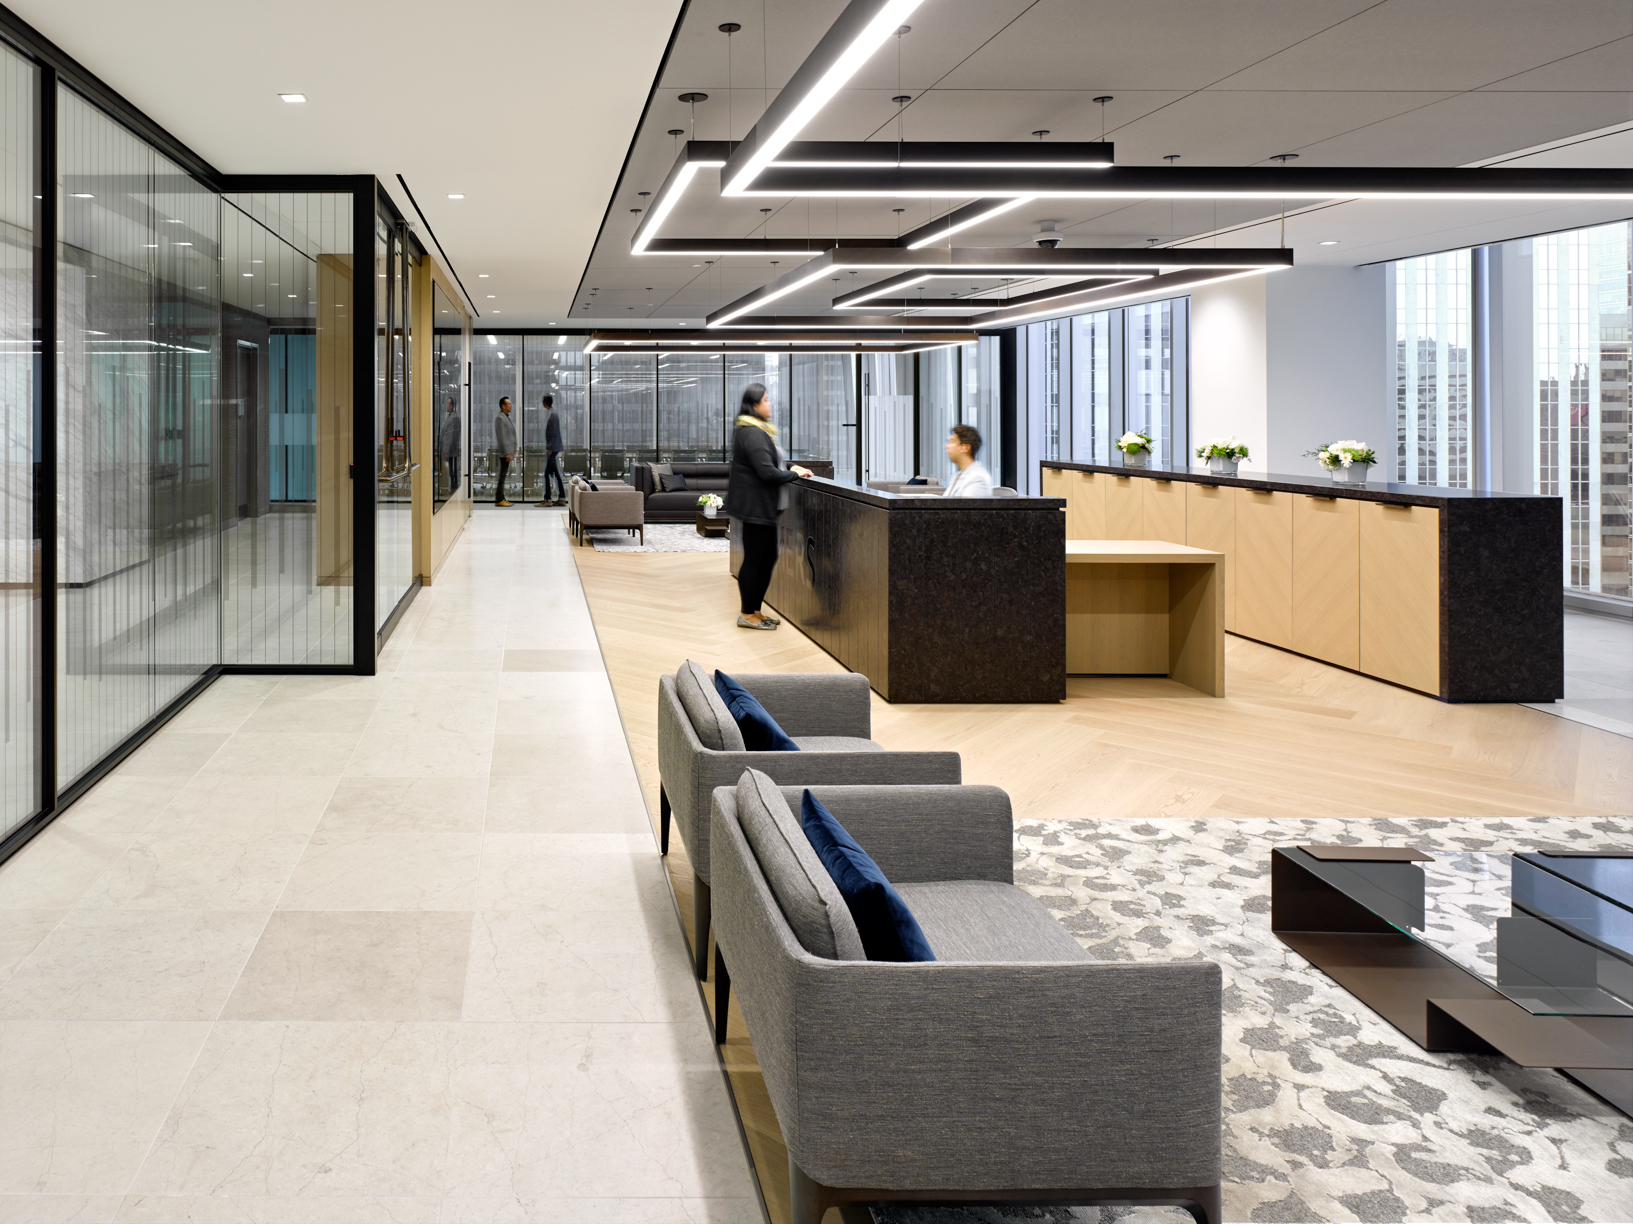 OMERS office lobby with sofas and glass walls